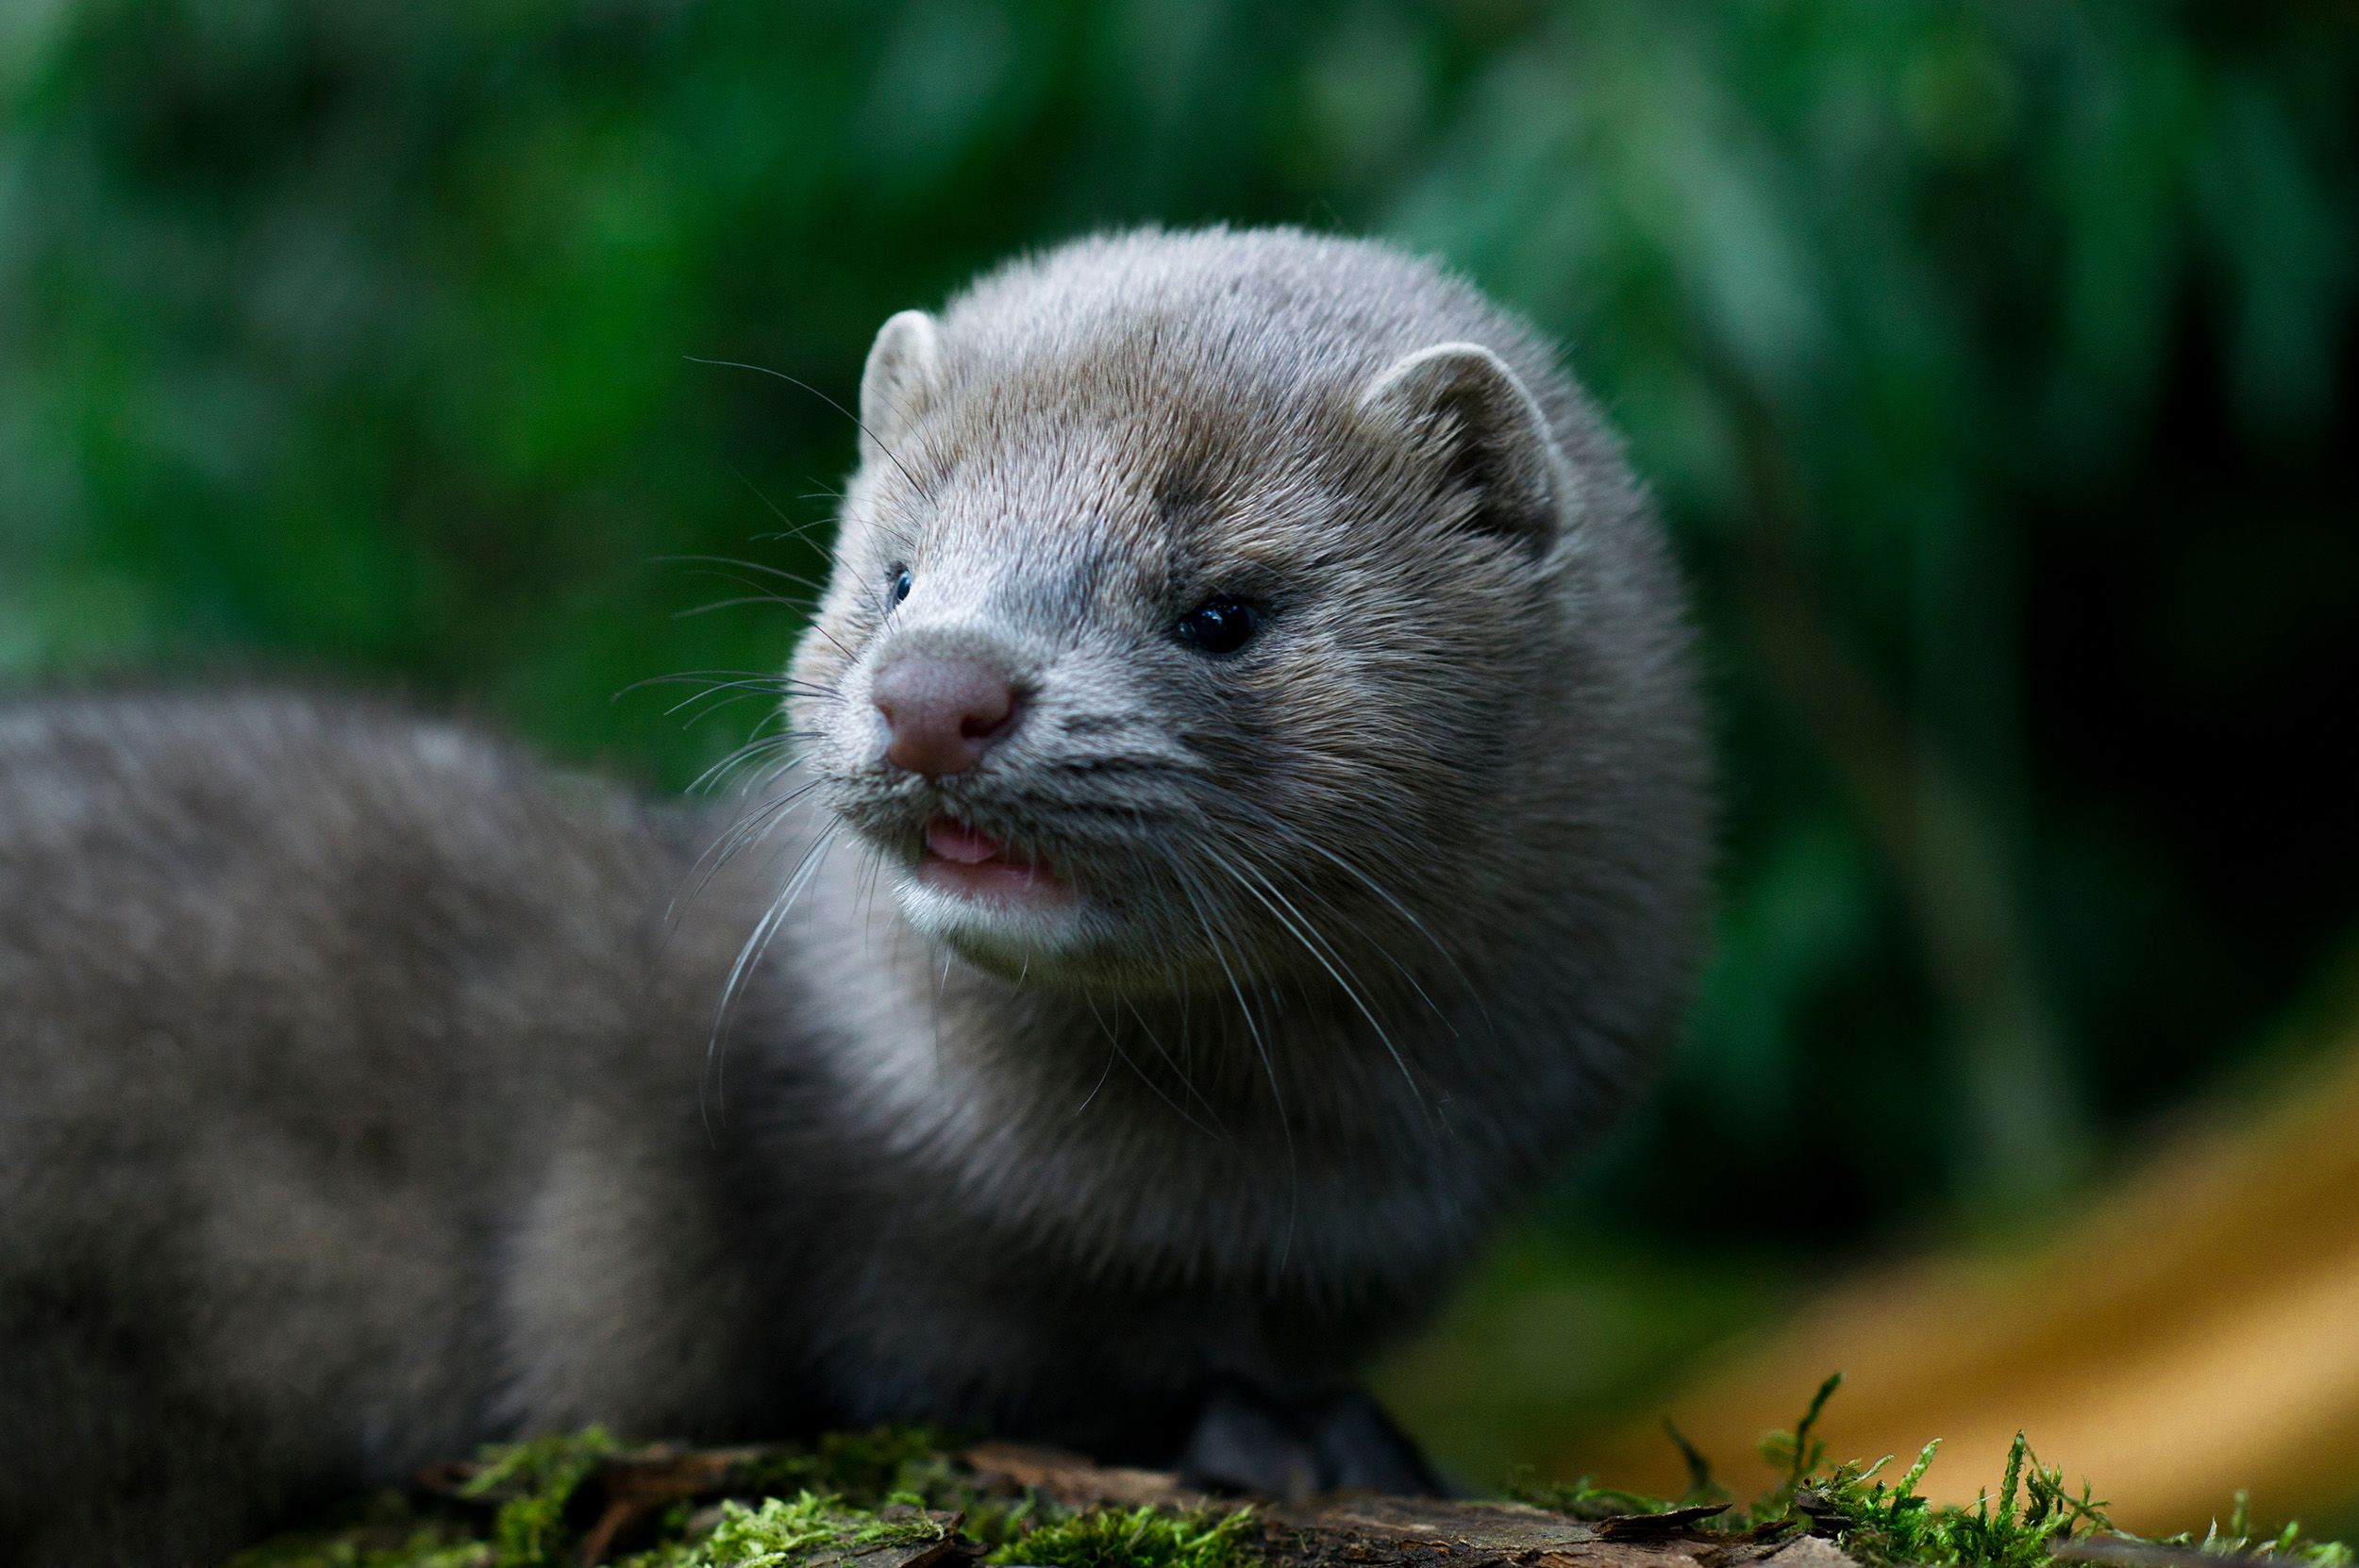 A mink may have infected a human with Covid-19, Dutch authorities believe | CNN